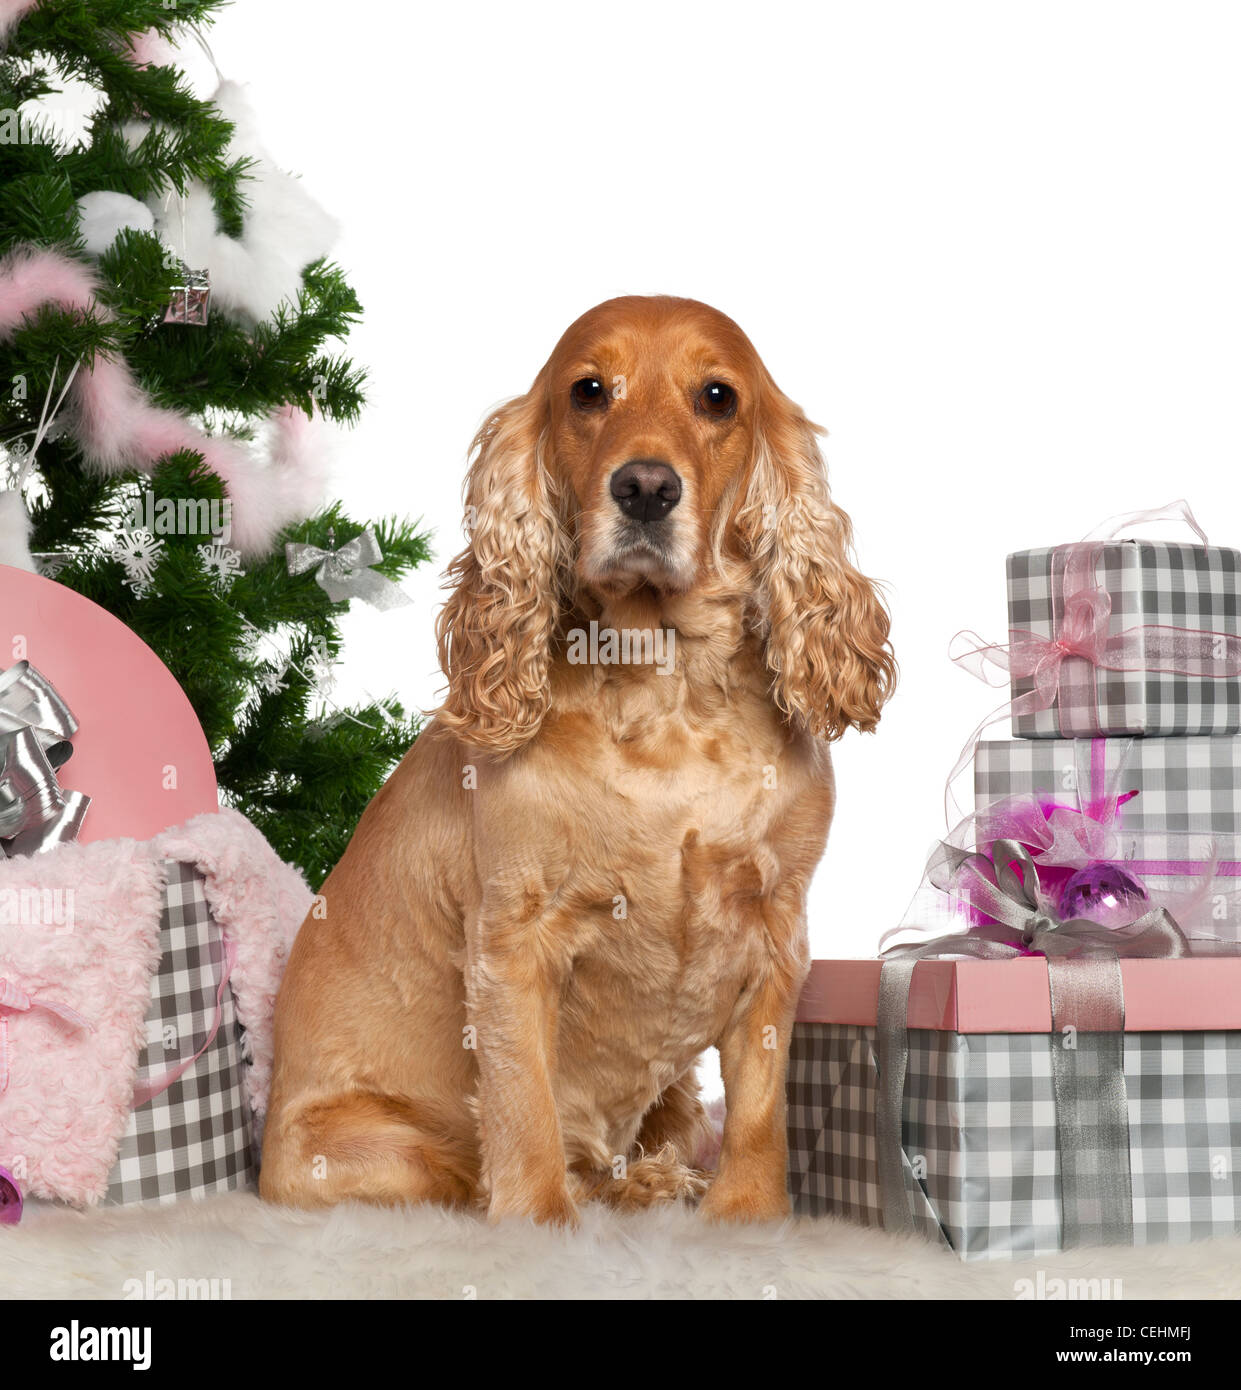 English Cocker Spaniel, 4 years old, sitting with Christmas tree and gifts in front of white background Stock Photo